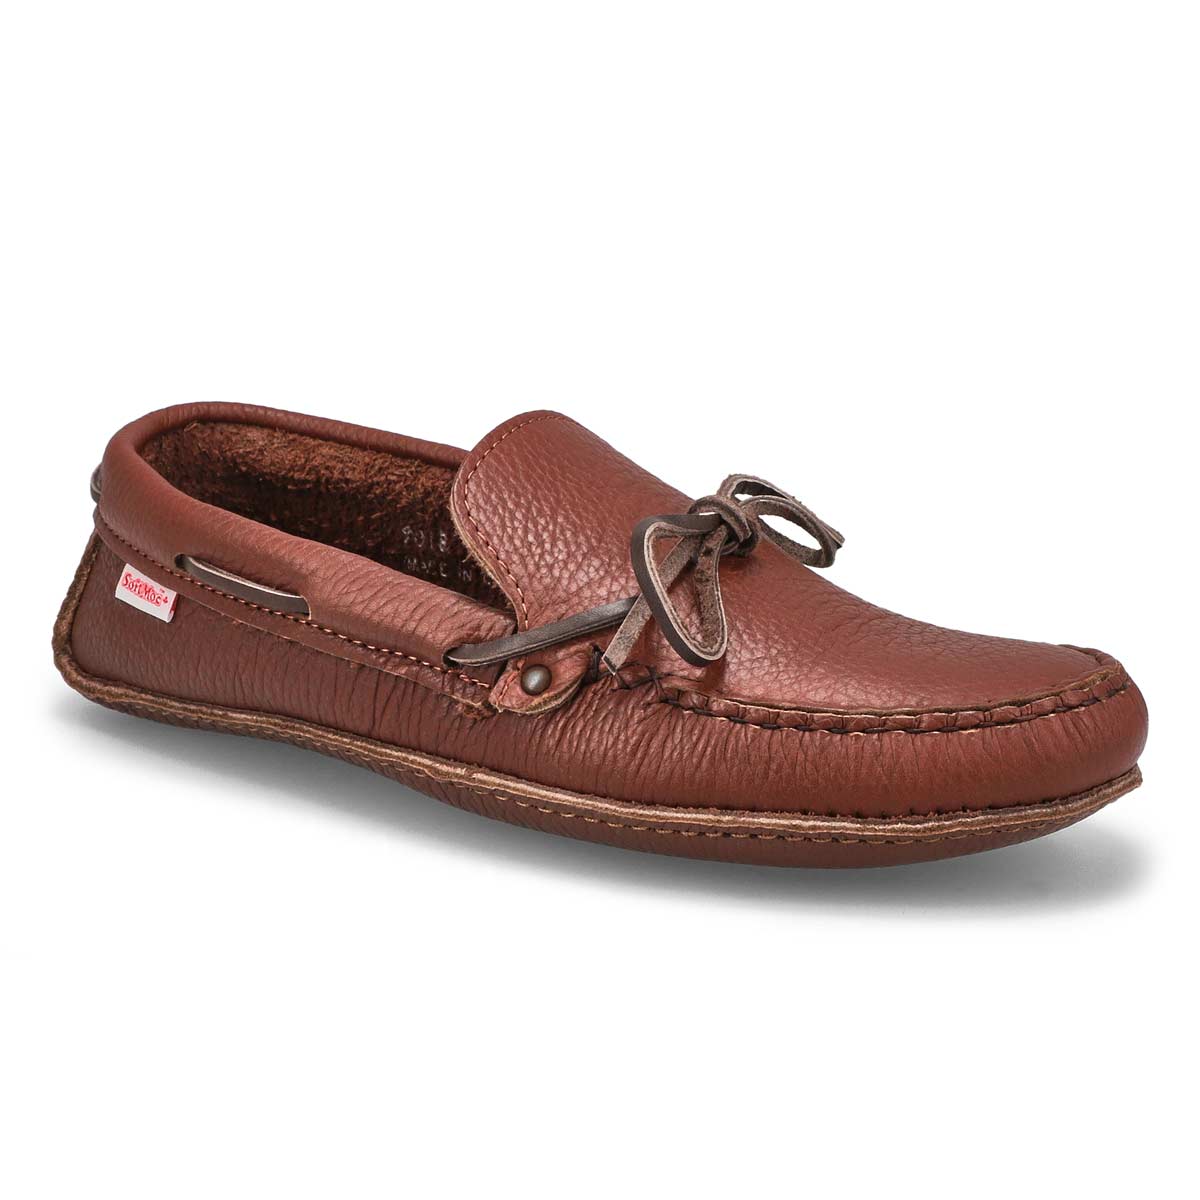 Men's 9018 Double Sole Handsewn Oil SoftMocs - Brown